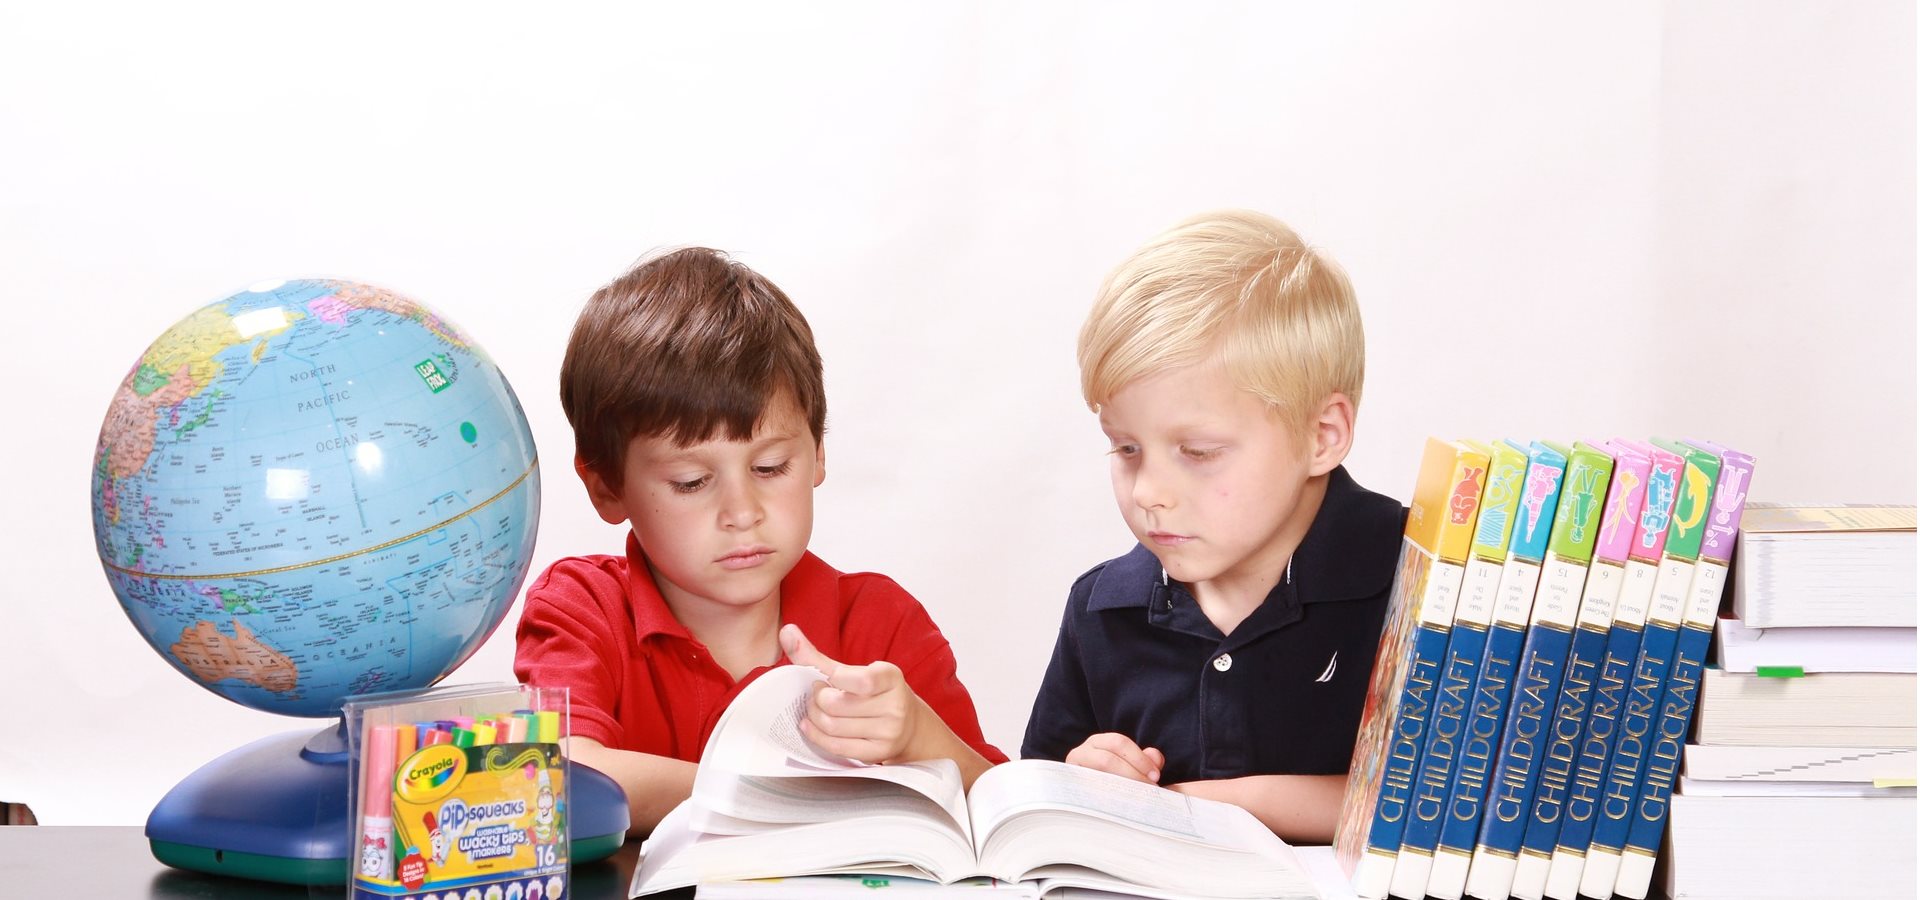 Two children sitting at a desk looking through some books